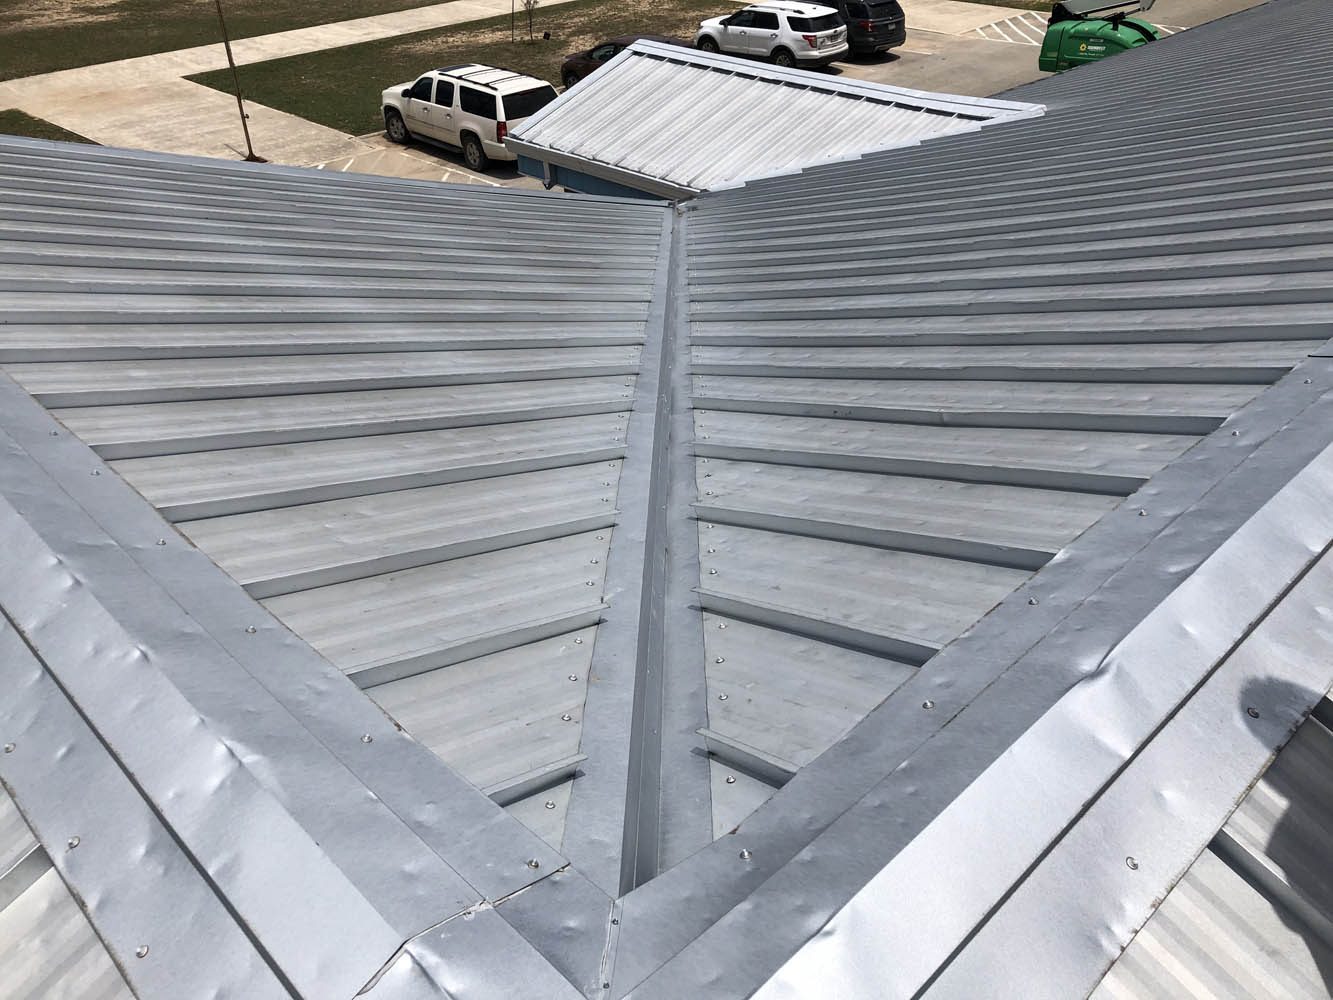 August 2022 – Commercial Roofing Systems